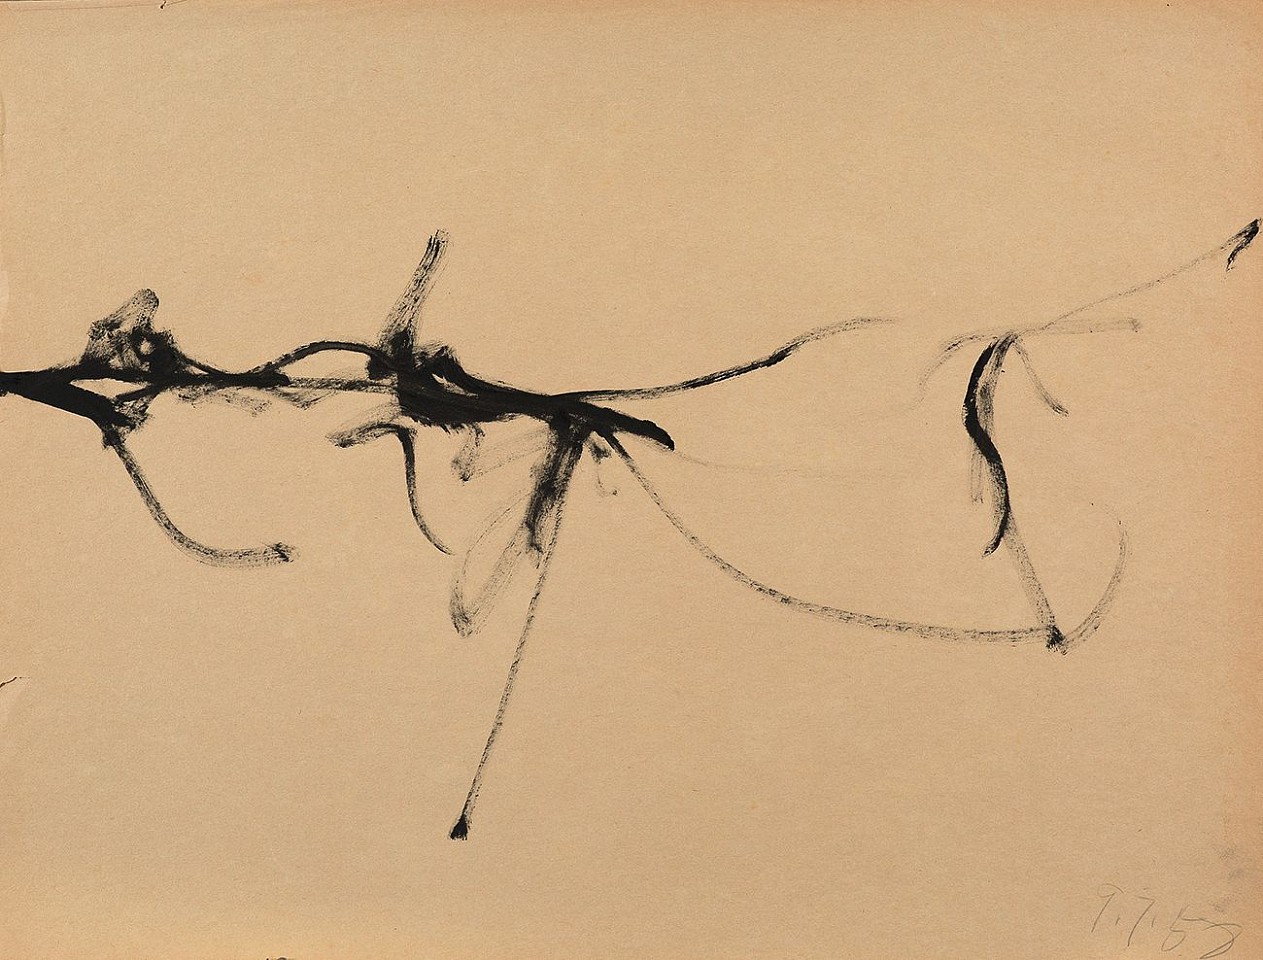 Walter Darby Bannard, Untitled, 1958
Ink on paper, 18 x 24 in. (45.7 x 61 cm)
BAN-00085